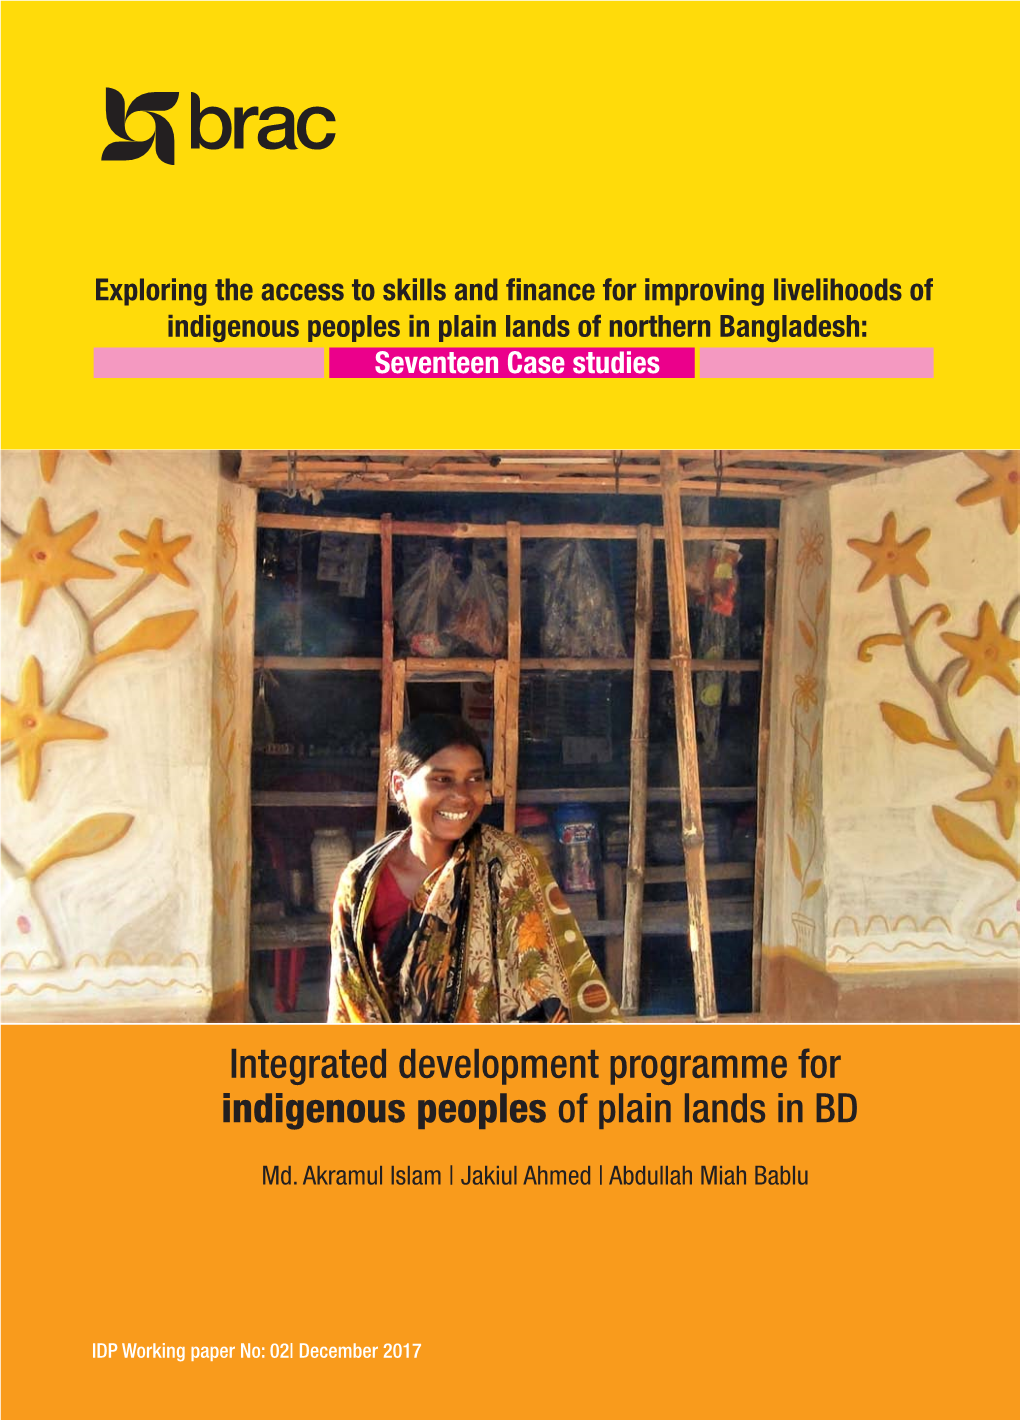 Case Studies 2017 Exploring the Access to Skills and Finance for Improving Livelihoods of Indigenous Peoples